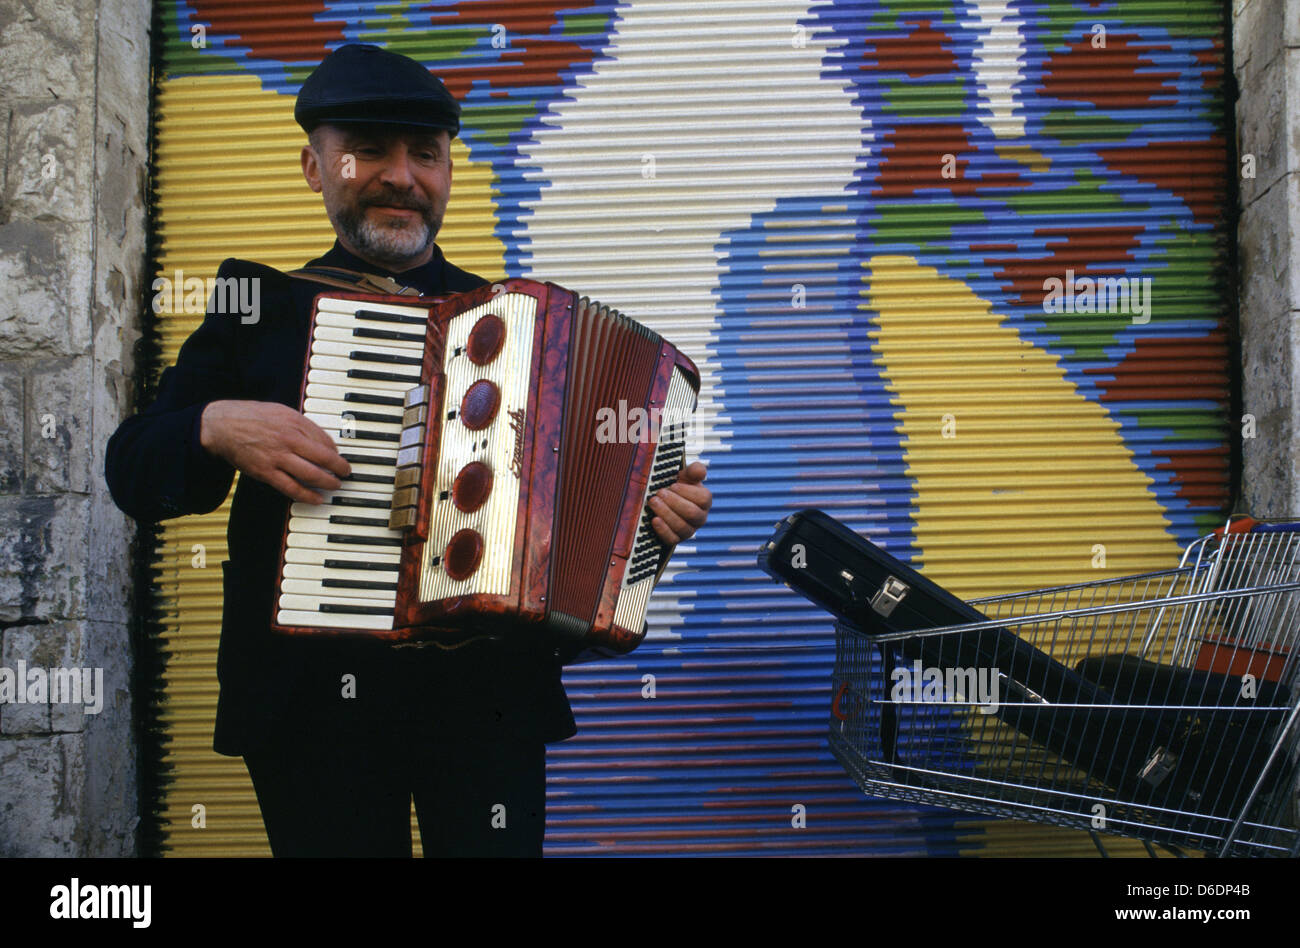 A Russian immigrant playing accordion in the street Tel Aviv Israel Stock Photo